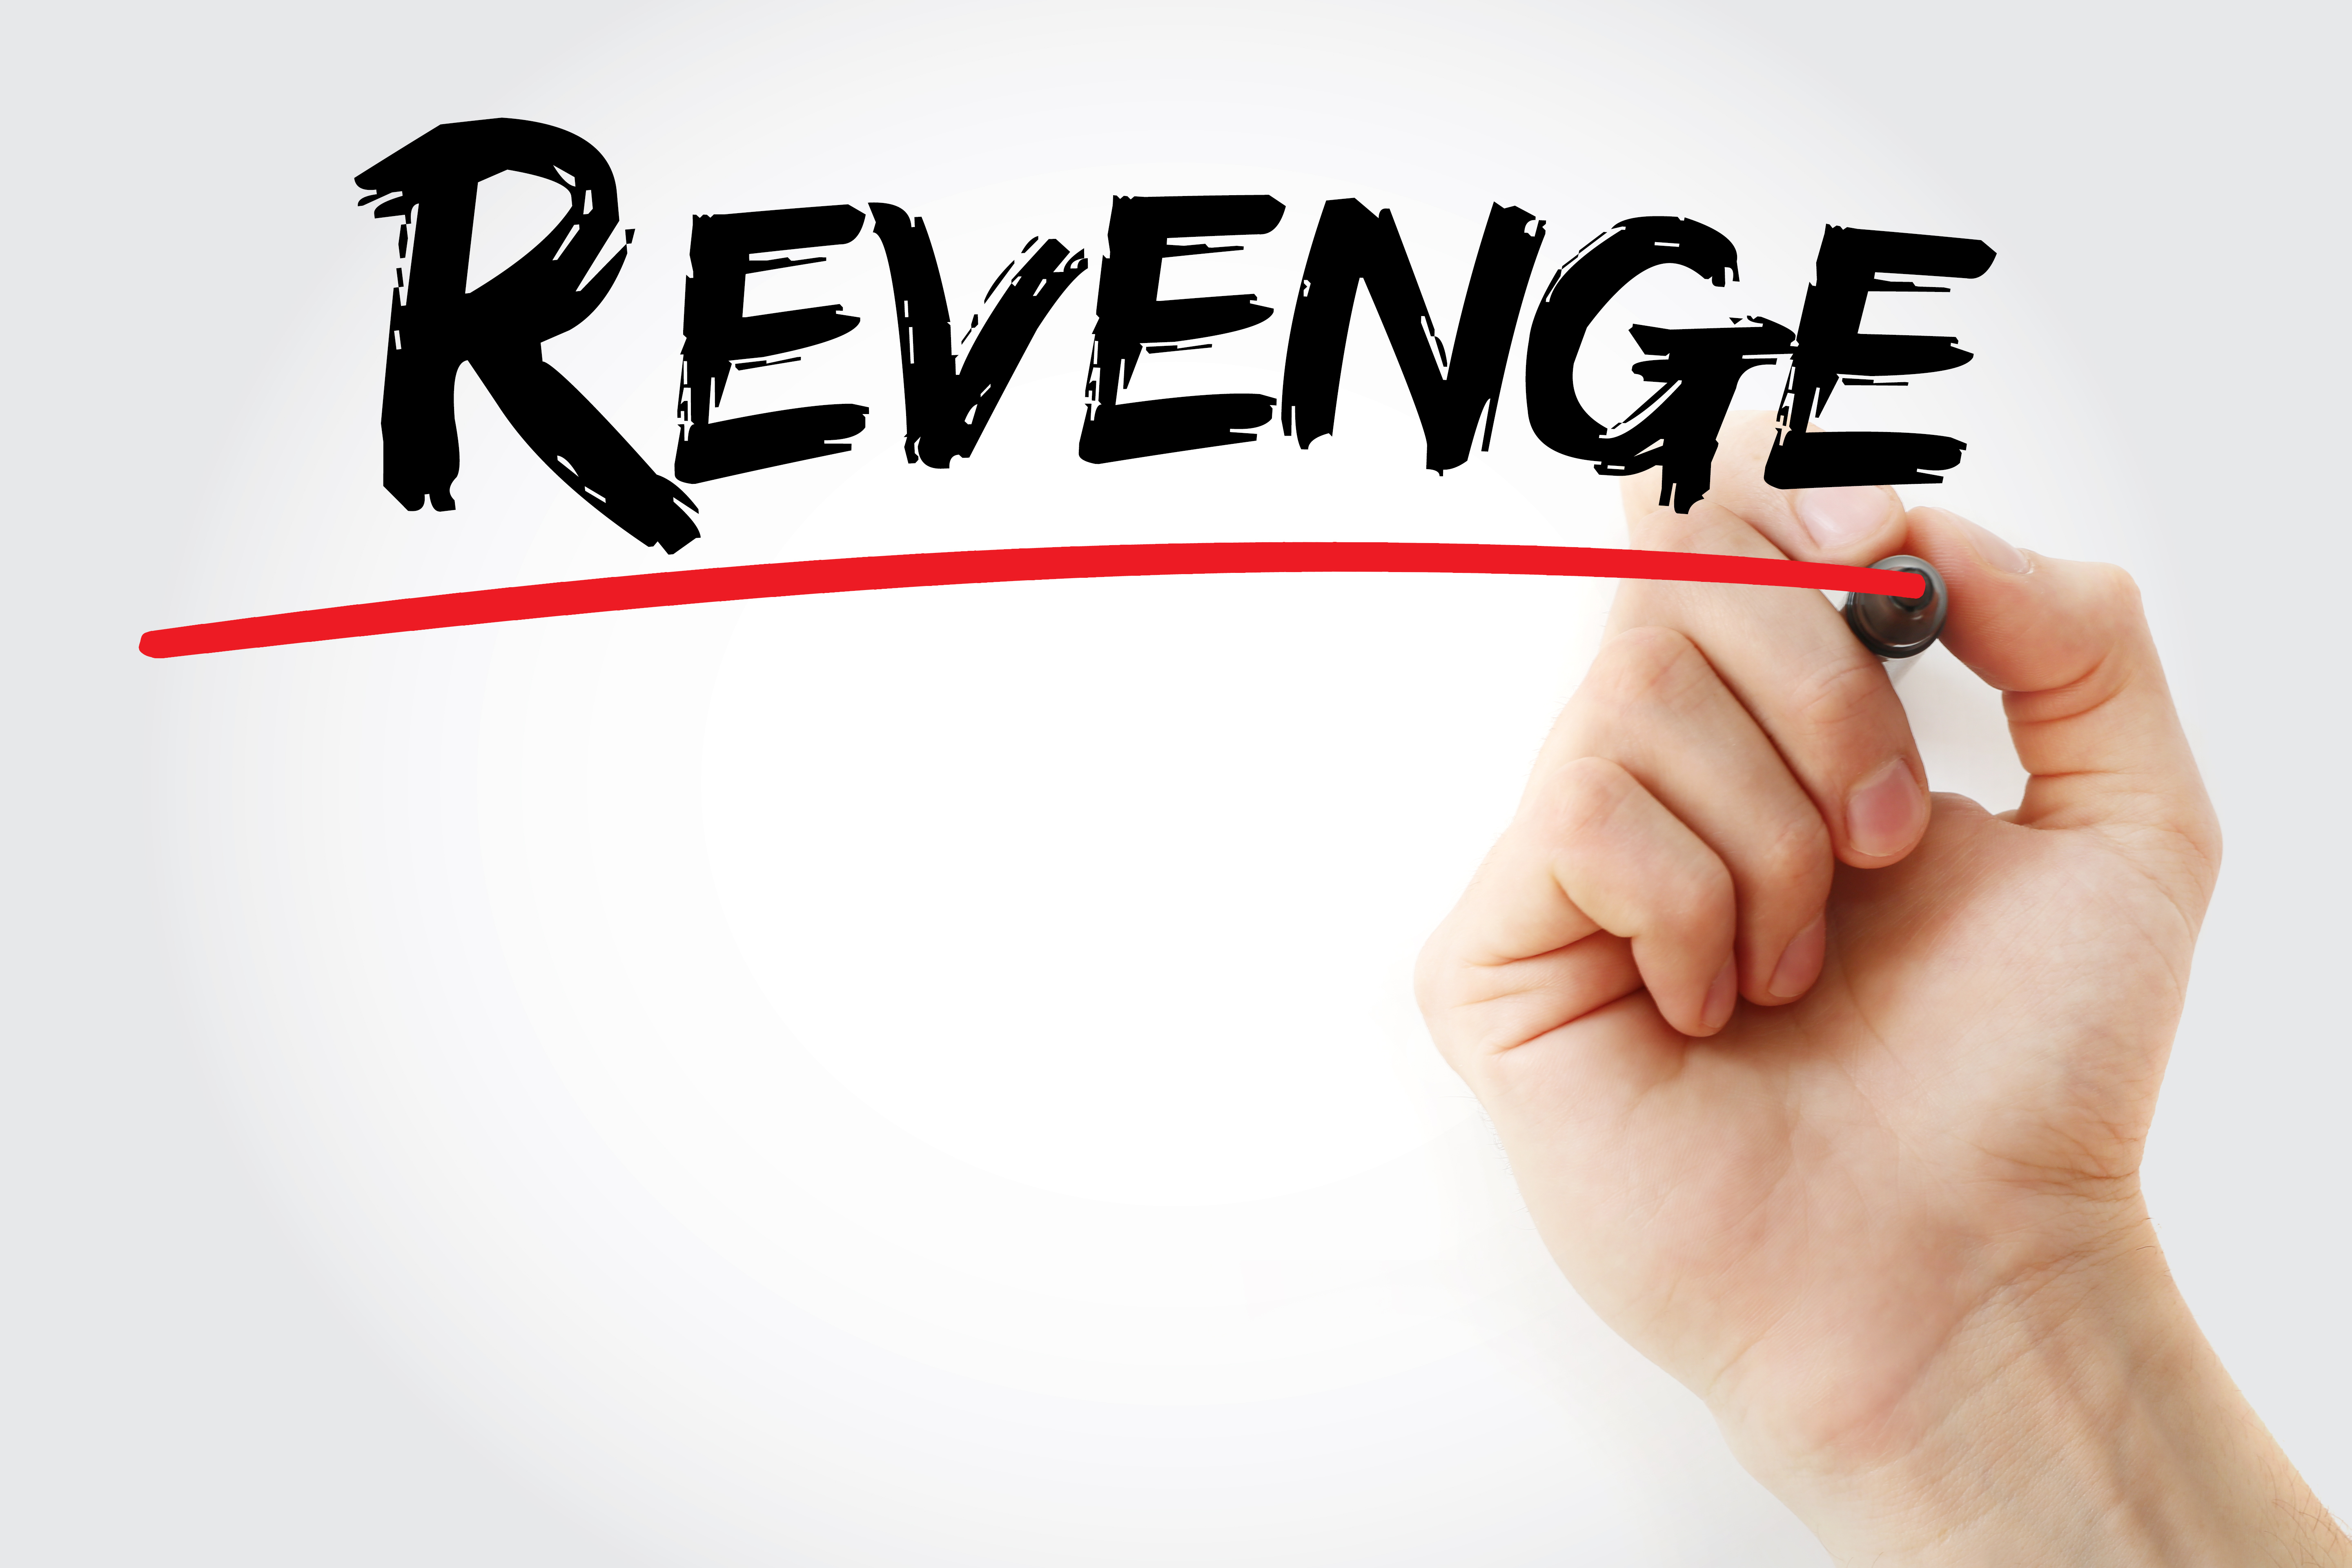 A hand writing the word "revenge" | Source: Shutterstock